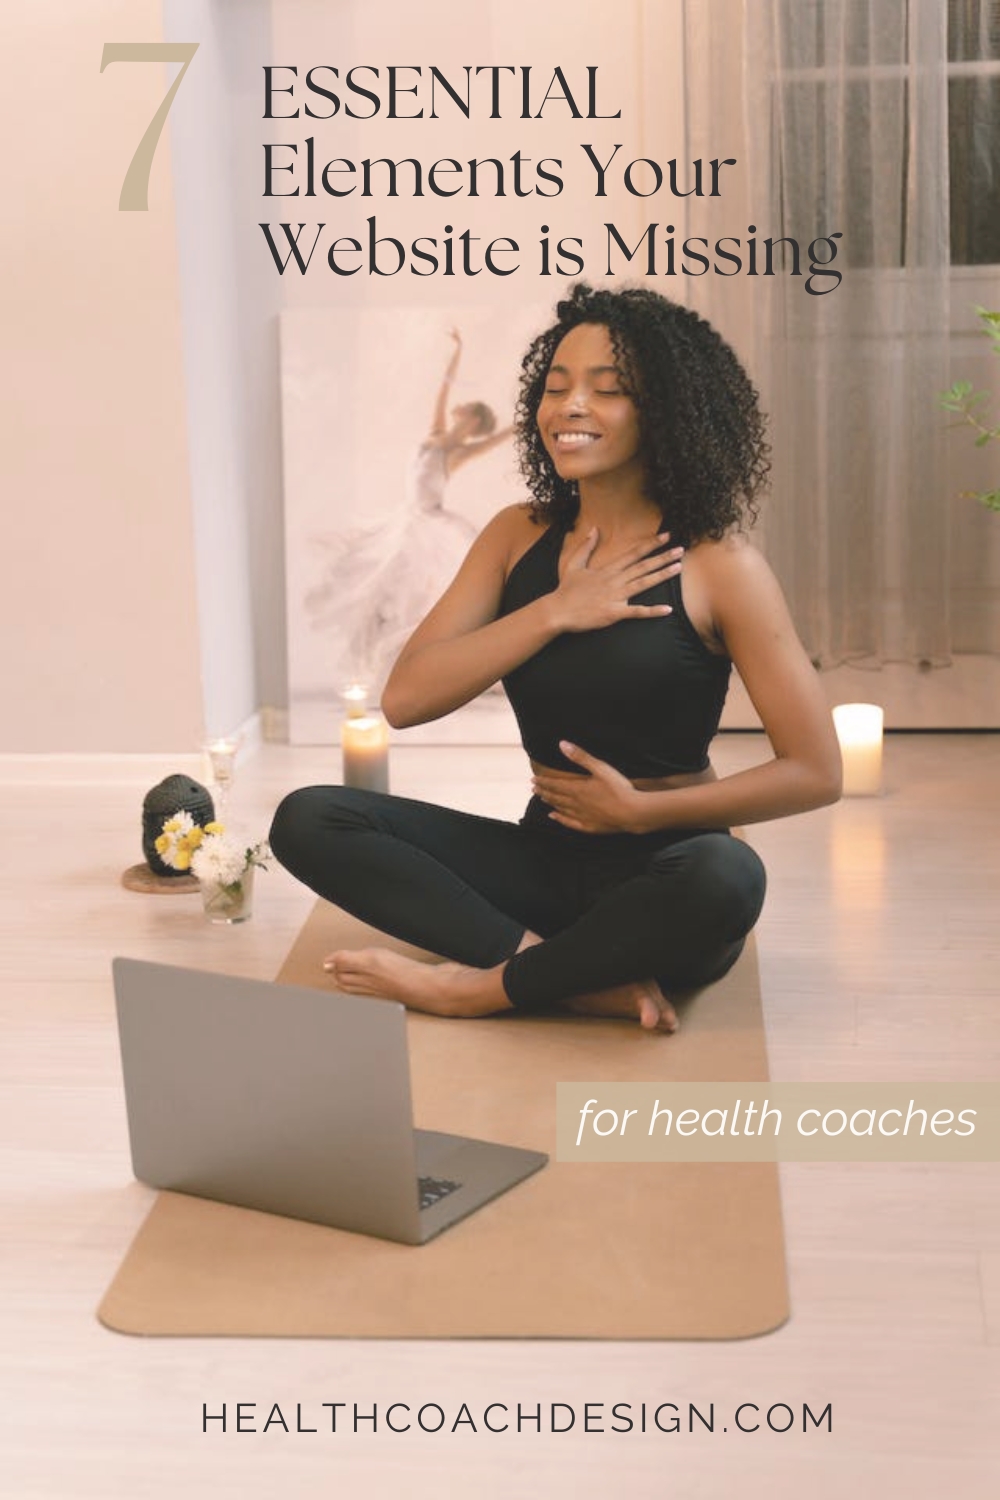 Pinterest pin for blog post titled "7 Essential Elements Your Health Coach Website is Missing." Woman is sitting on a fitness mat with a laptop placed on the mat in front of her.